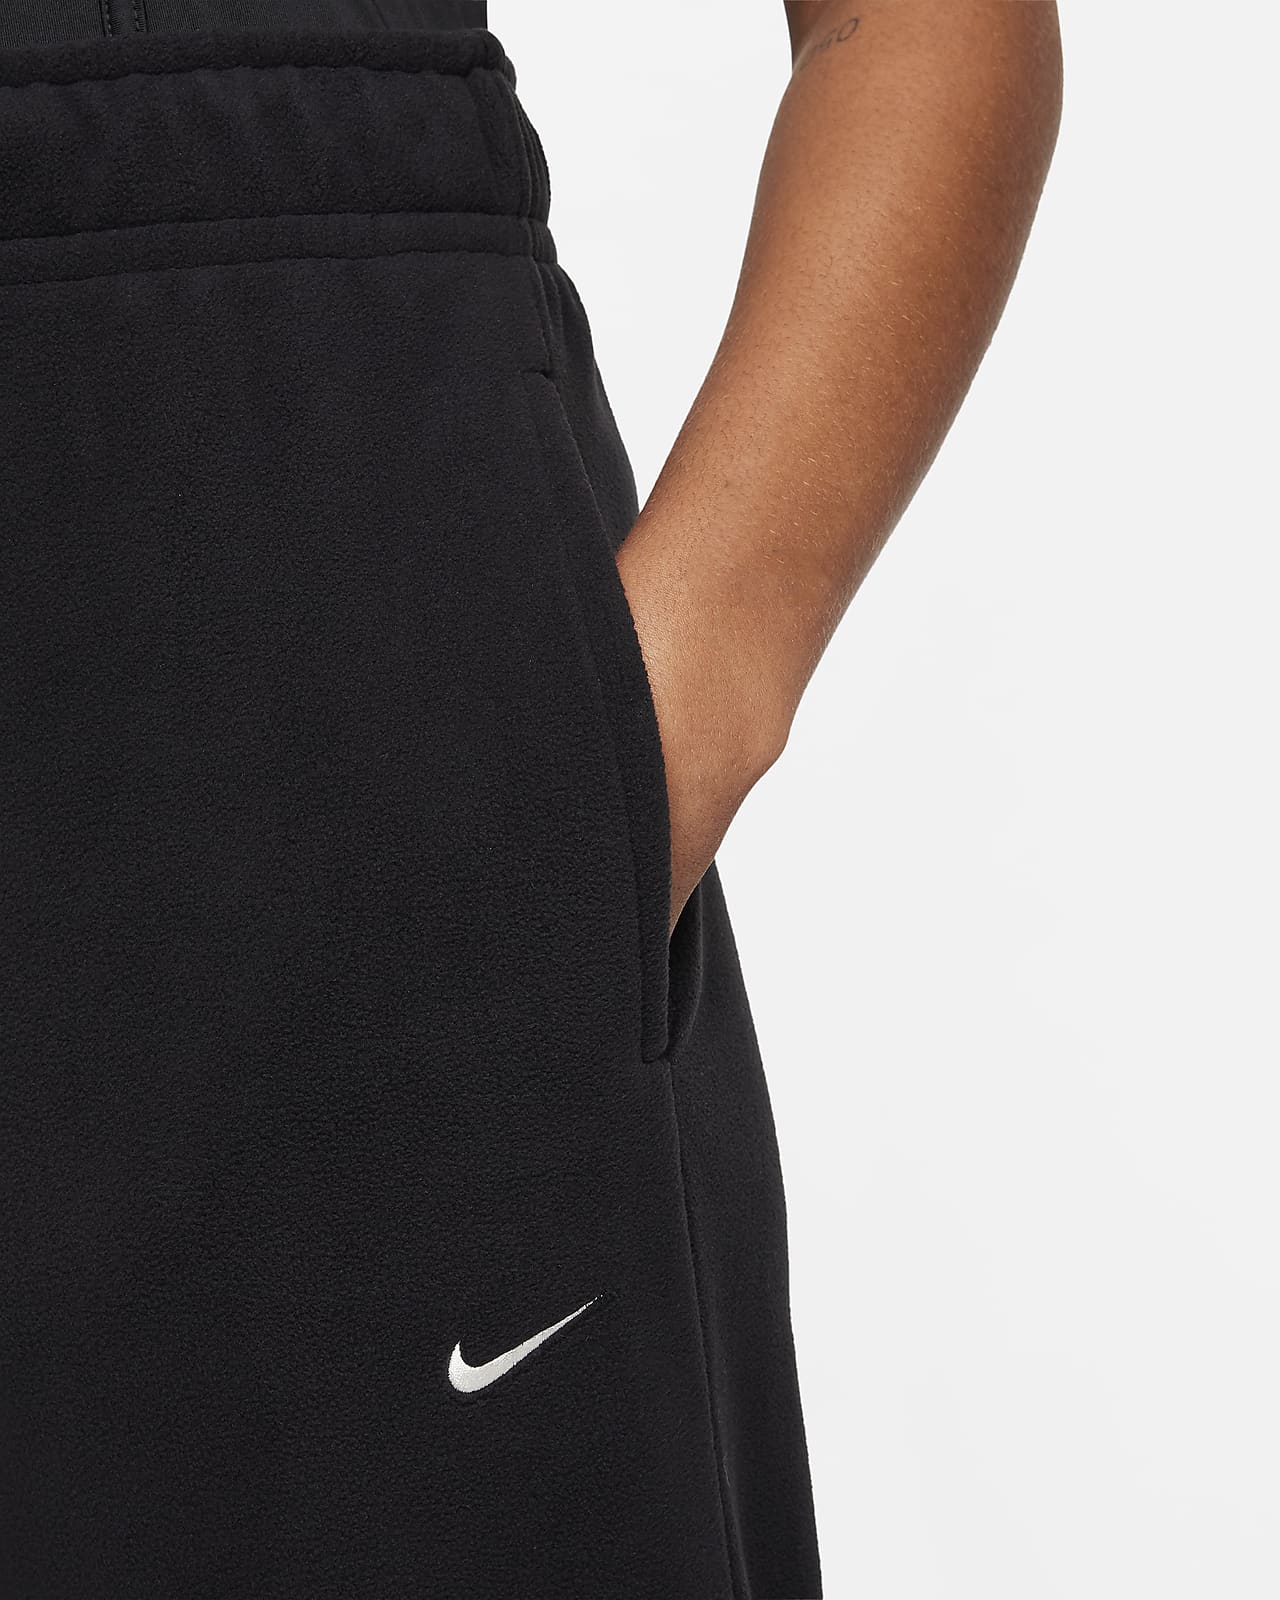 Nike Women's Therma-FIT Essential Running Pant - Running Warehouse Europe